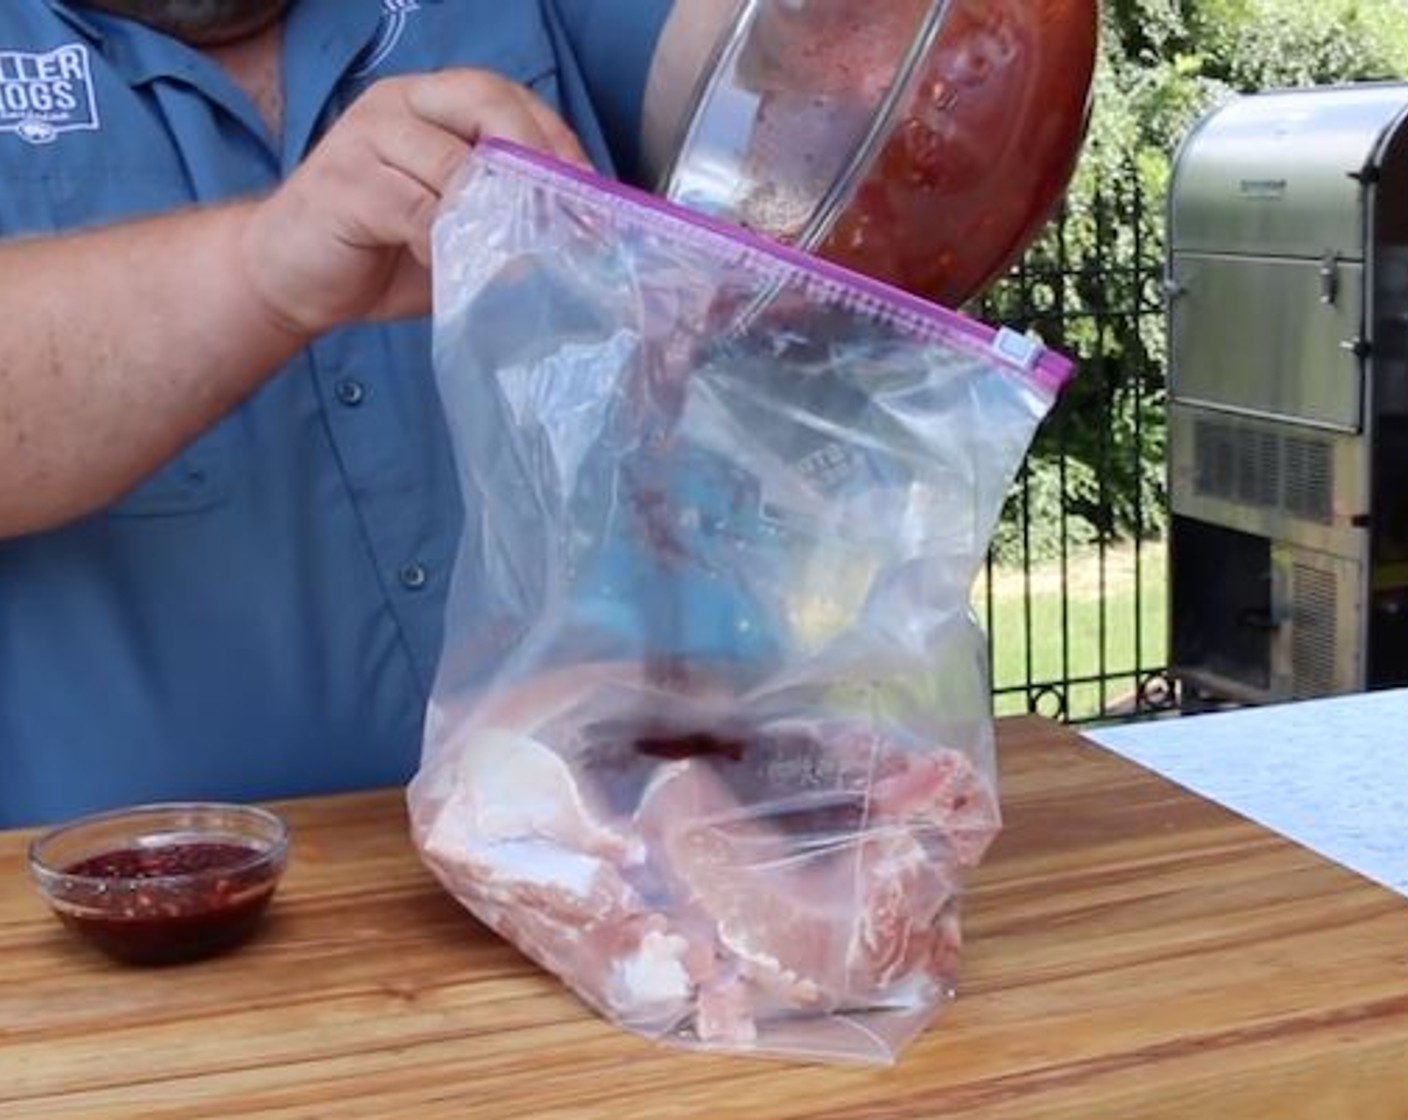 step 2 Place Center-Cut Pork Chops (8) in a large resealable plastic bag and pour marinade over the chops. Close the top of the bag and move the pork chops around so everything is covered with the marinade. Place in the refrigerator for 12 hours.